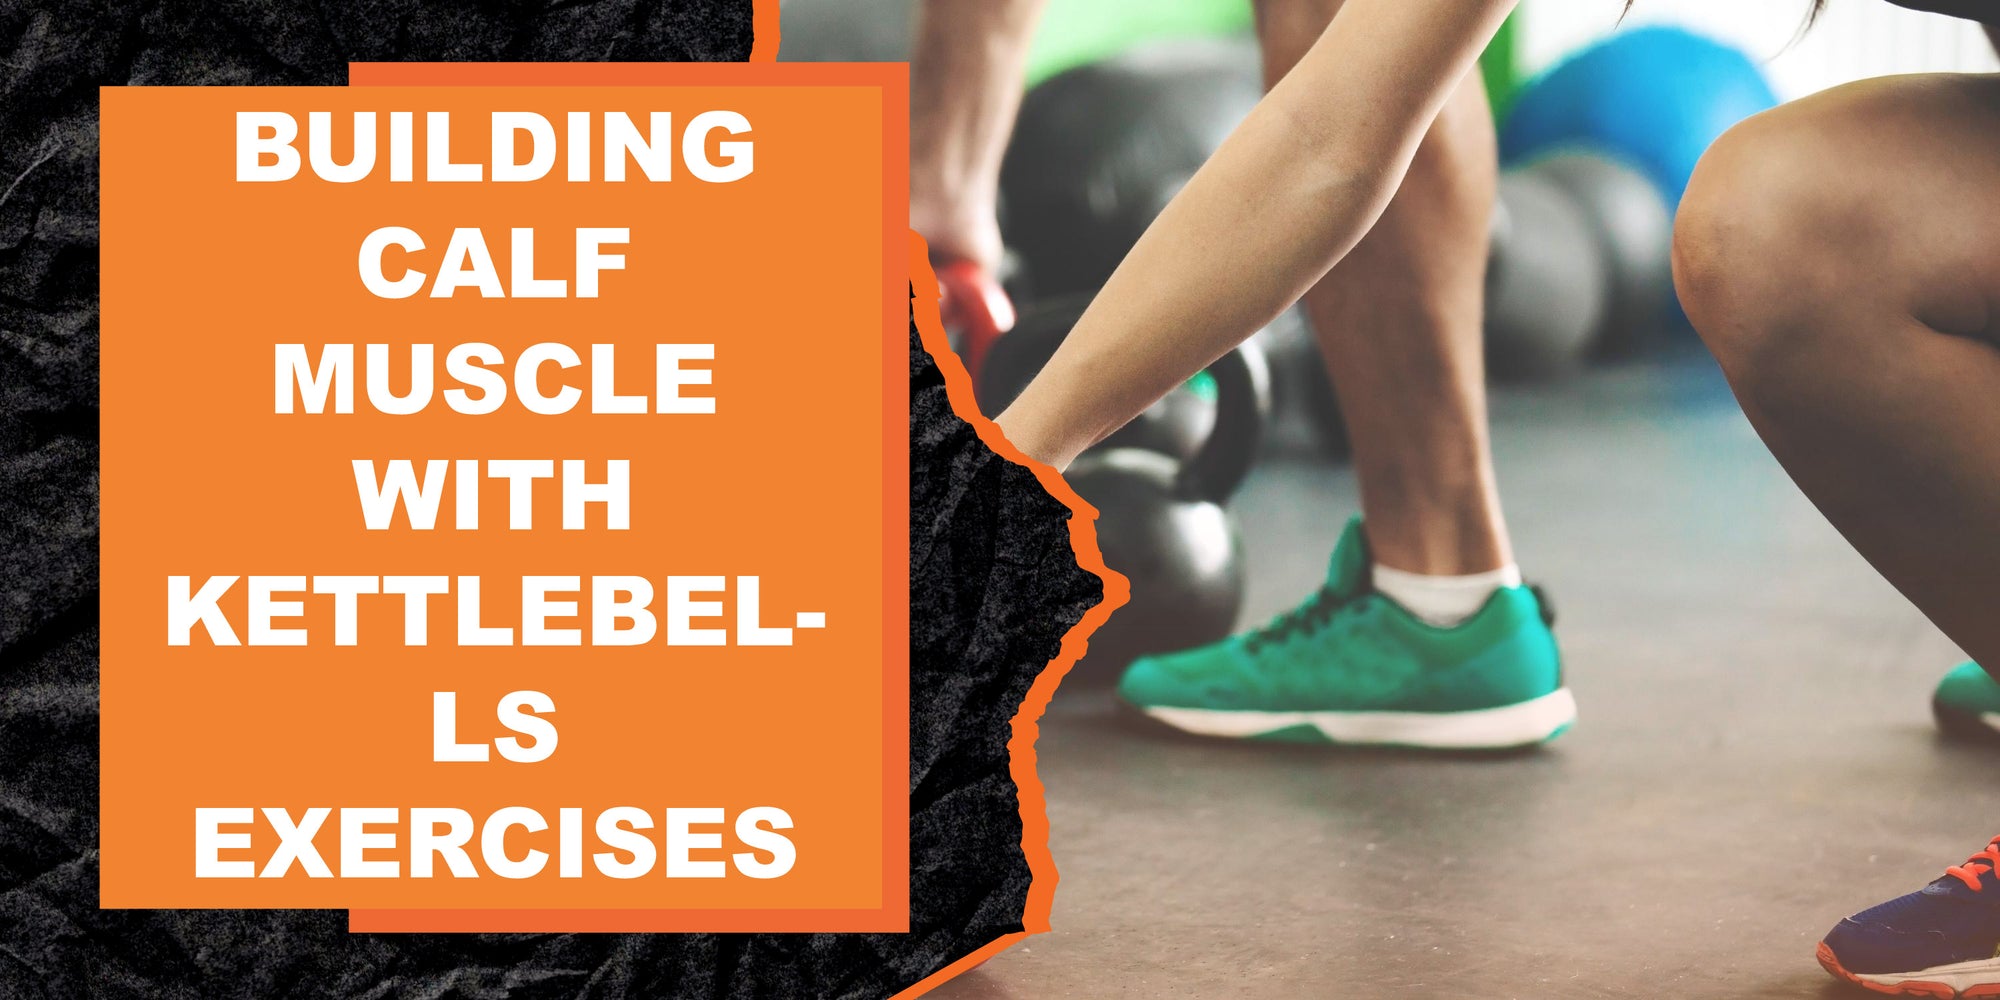 Building Calf Muscle with Kettlebells Exercises